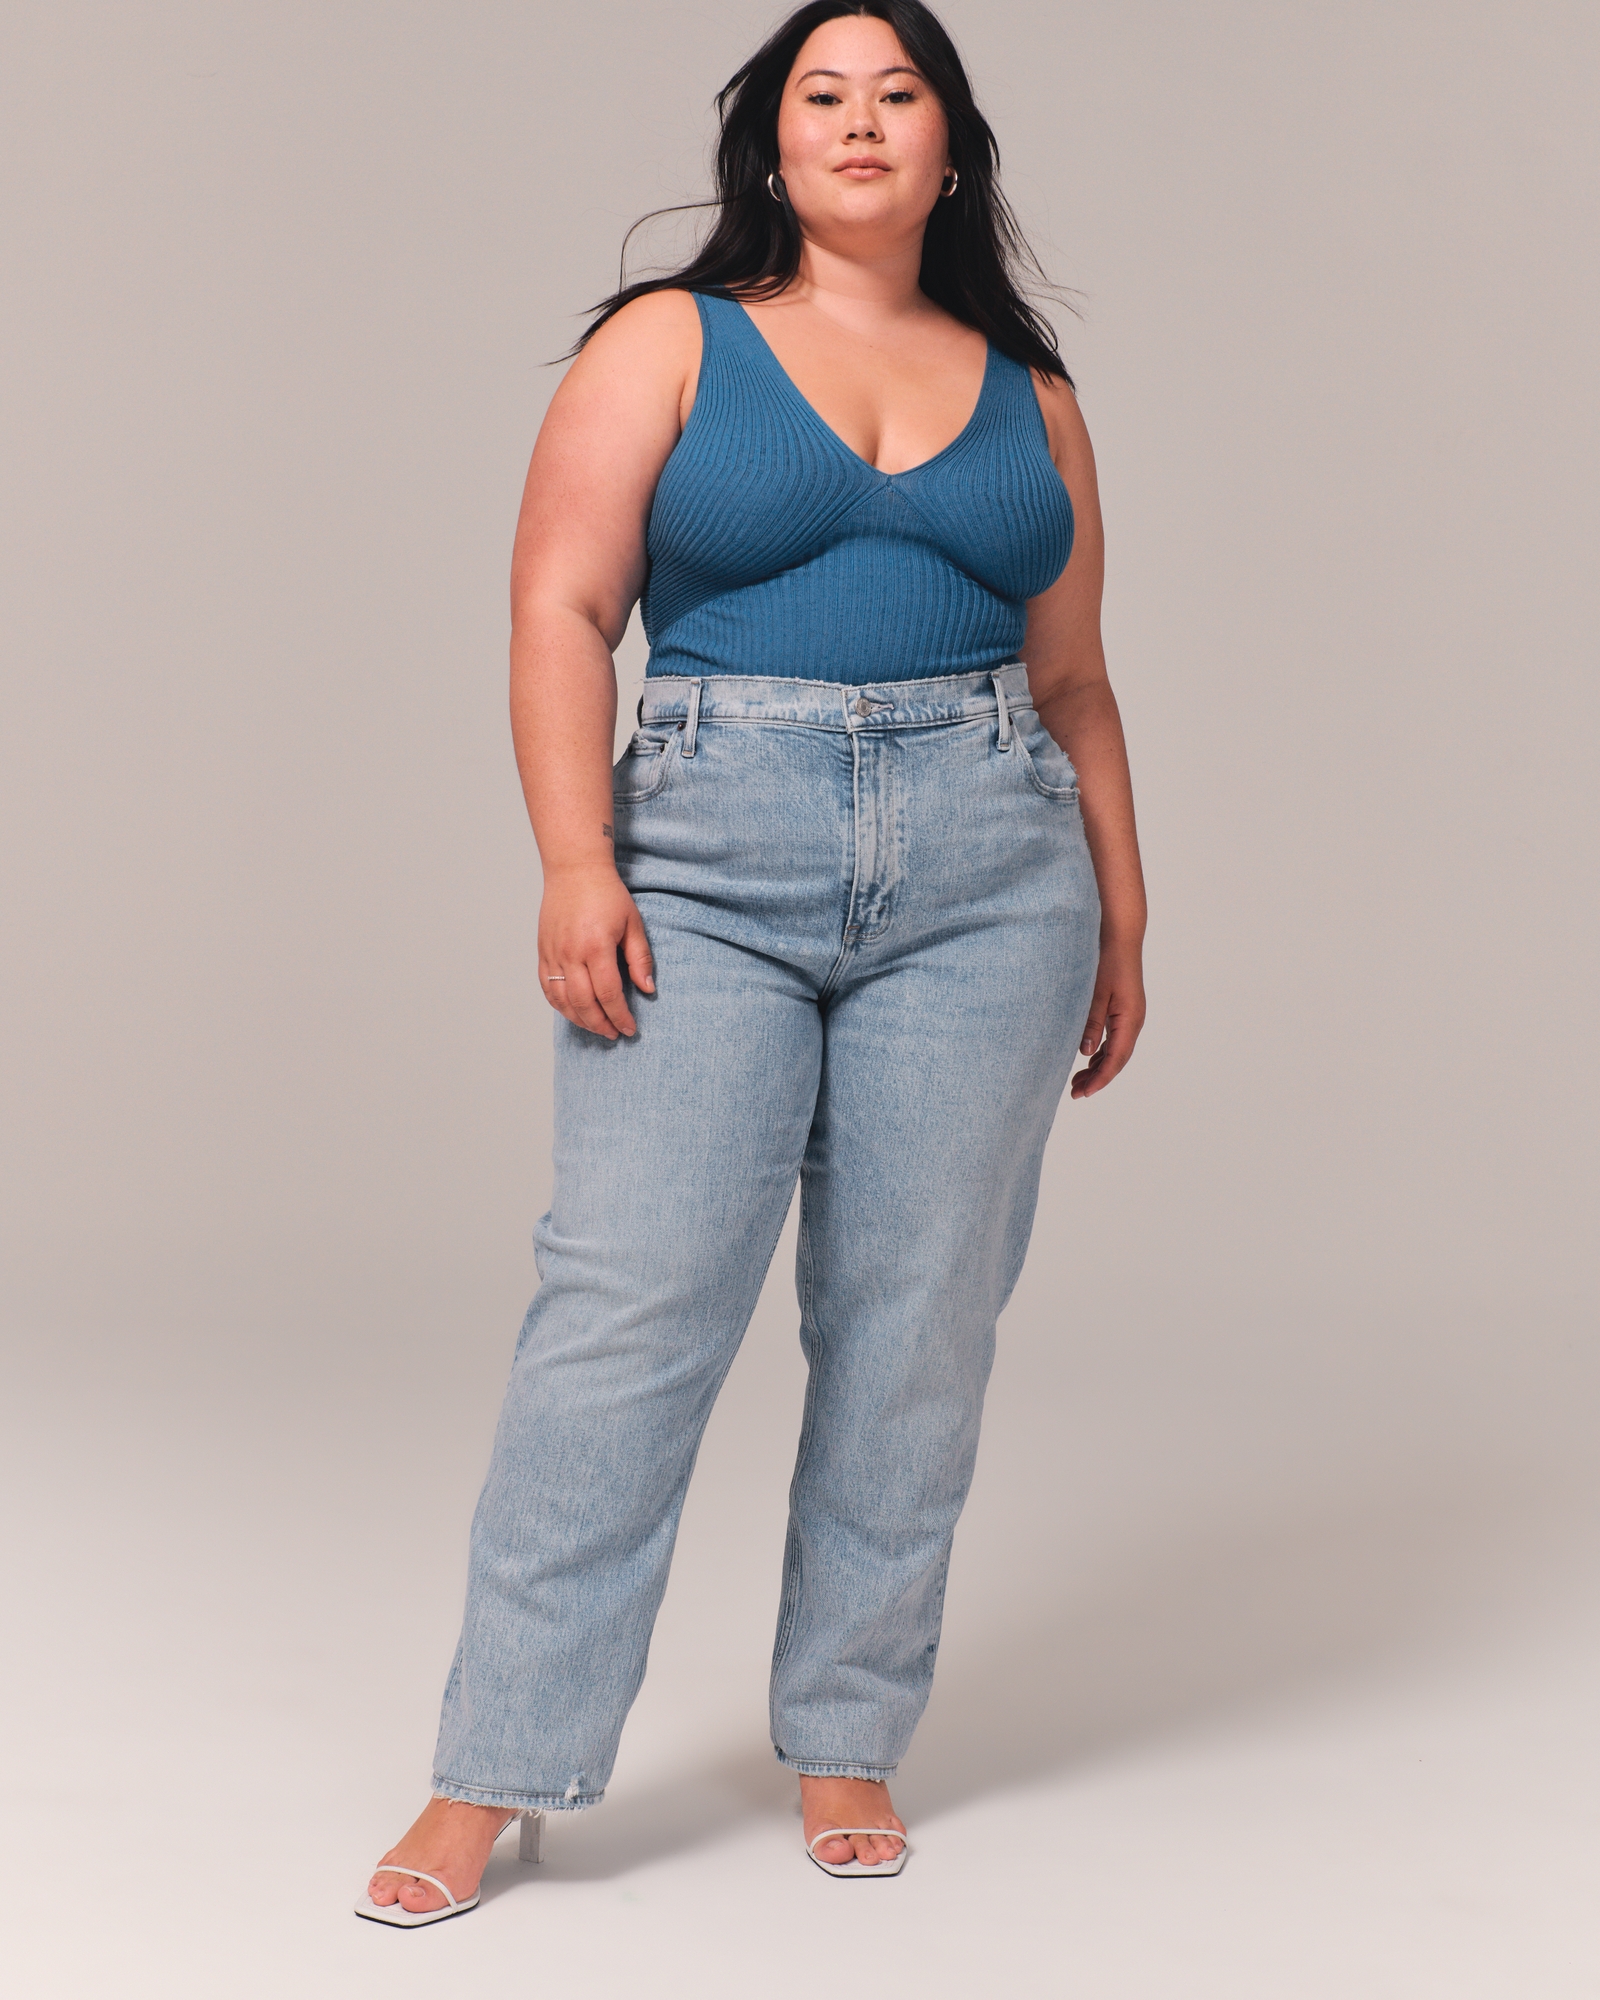 ABERCROMBIE CURVE LOVE JEANS - try-on haul size 27 (unsponsored